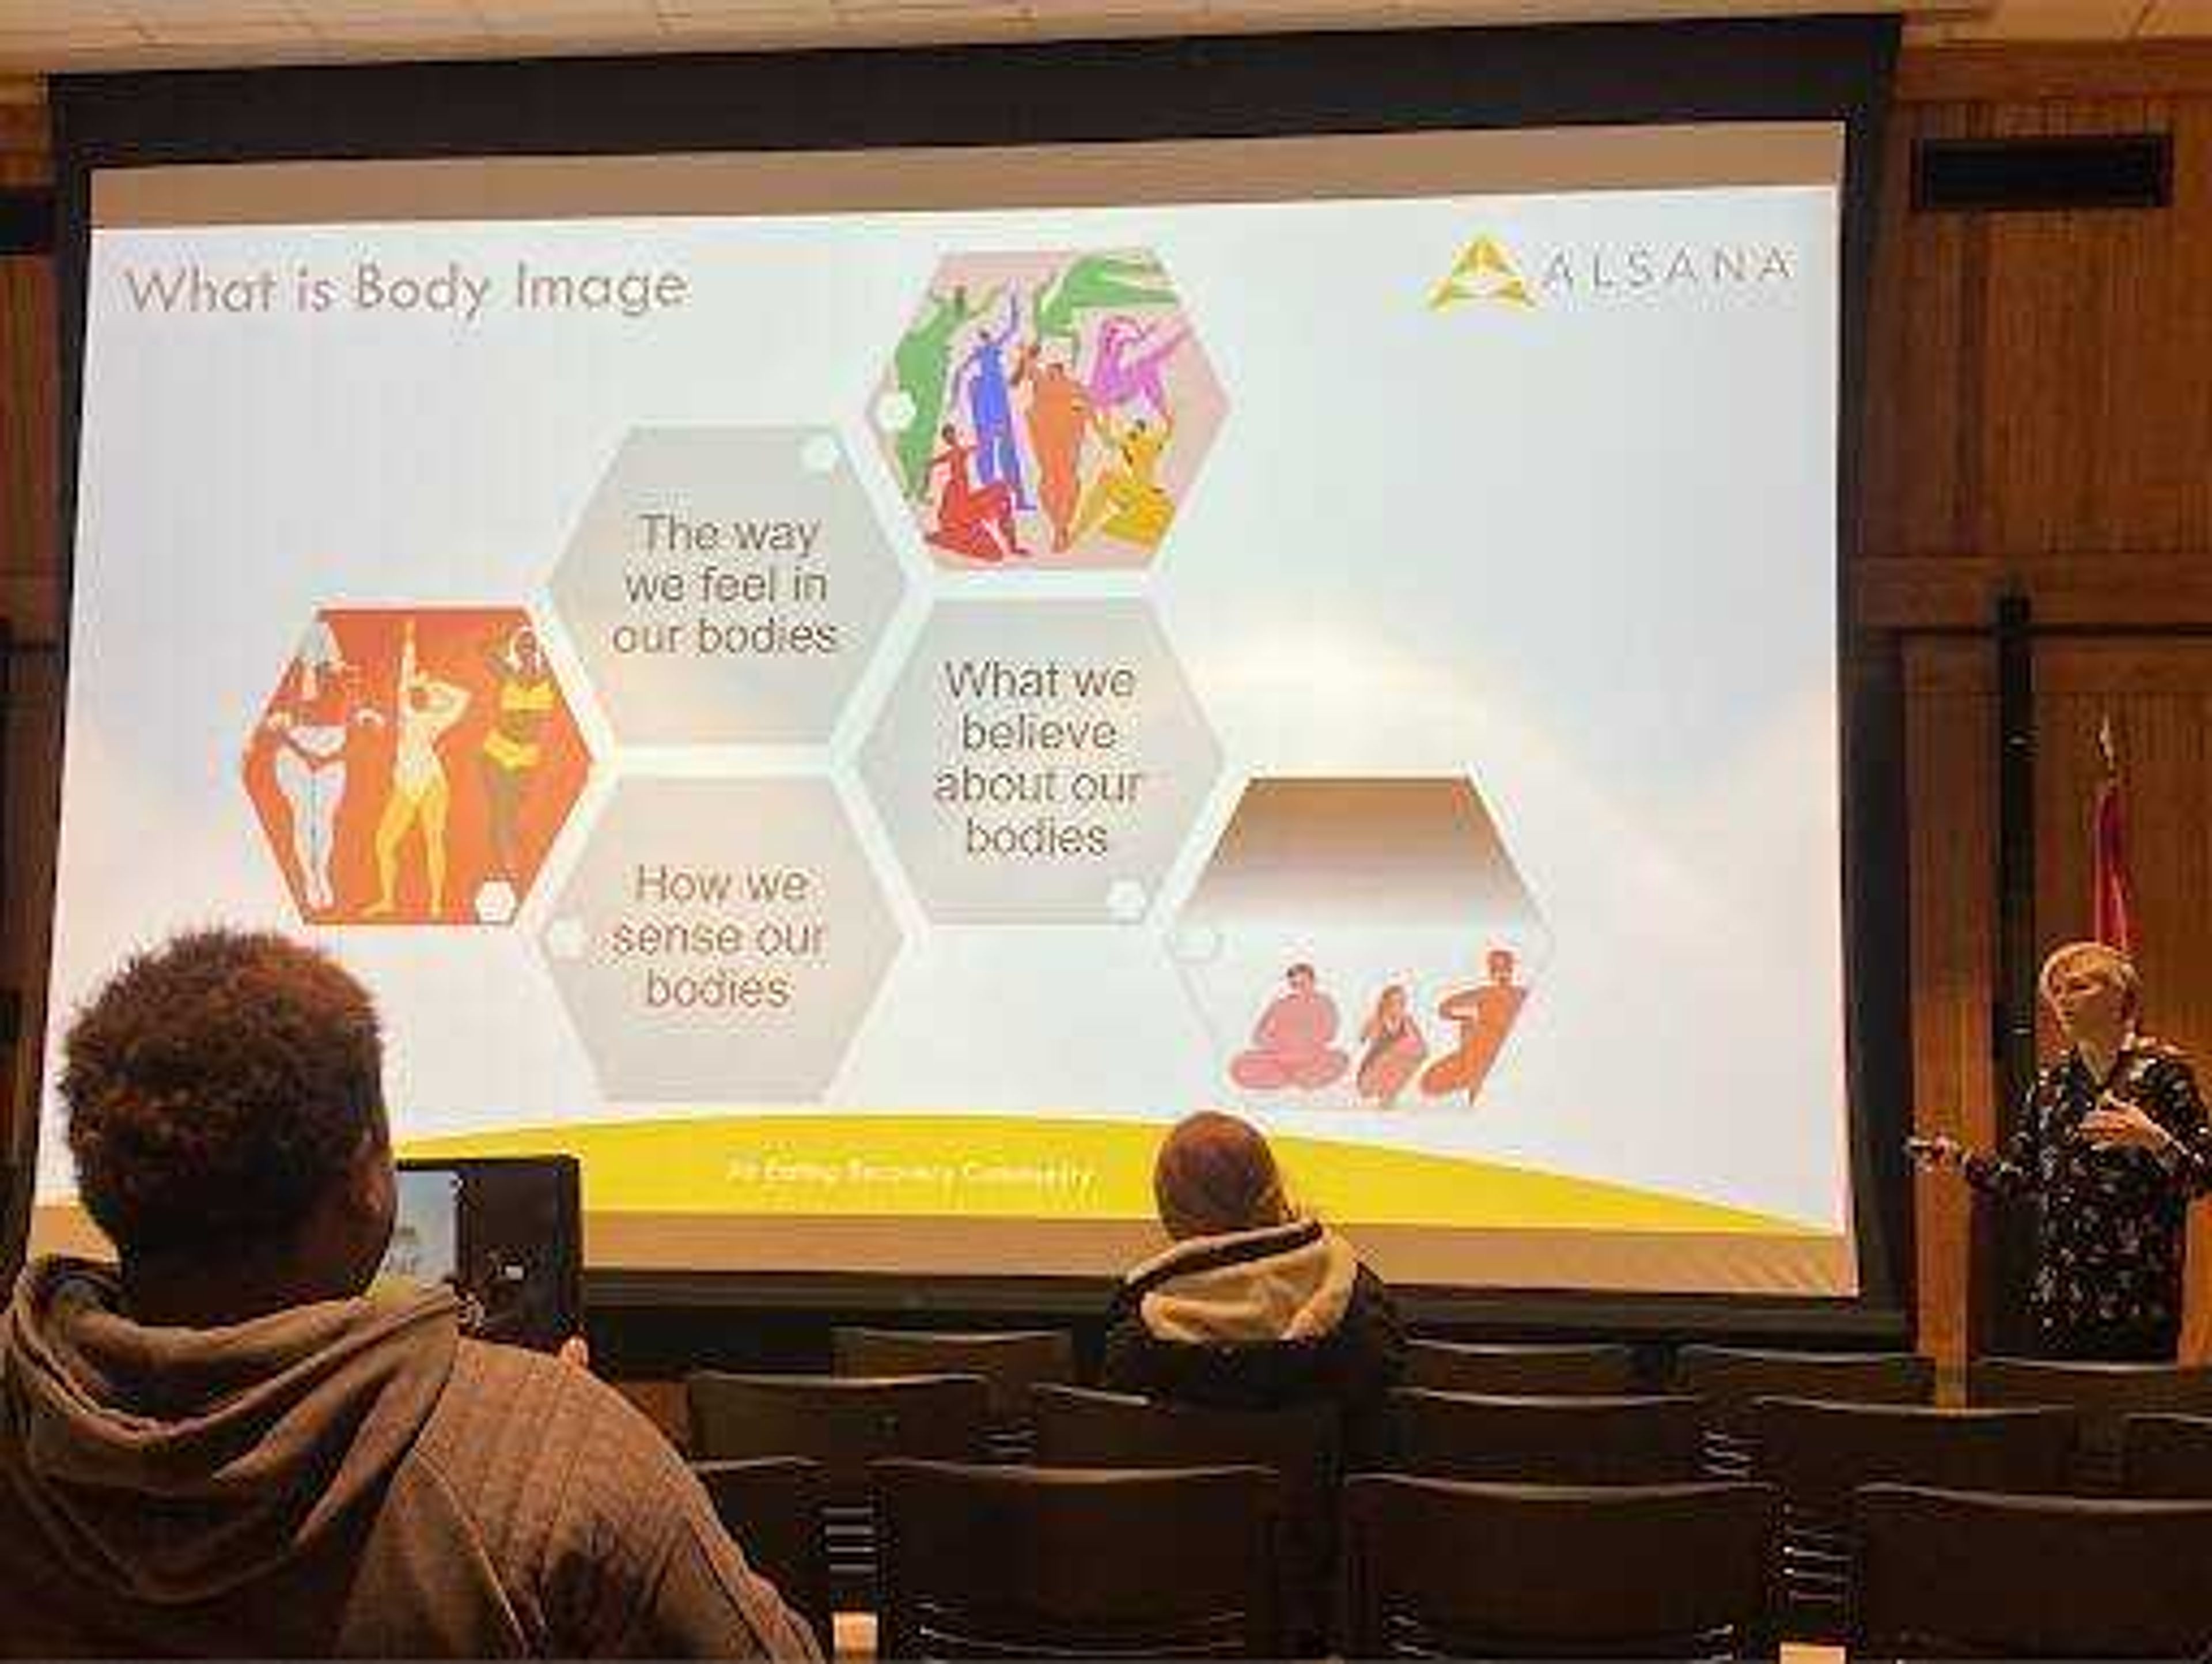 Lolly Wool, a guest speaker from Birmingham, Ala. and the Regional Executive Director of Alansa, talks about the different components that make up body image. Wool spoke at the University Center this Wednesday as part of Eating Disorder Awareness Week.